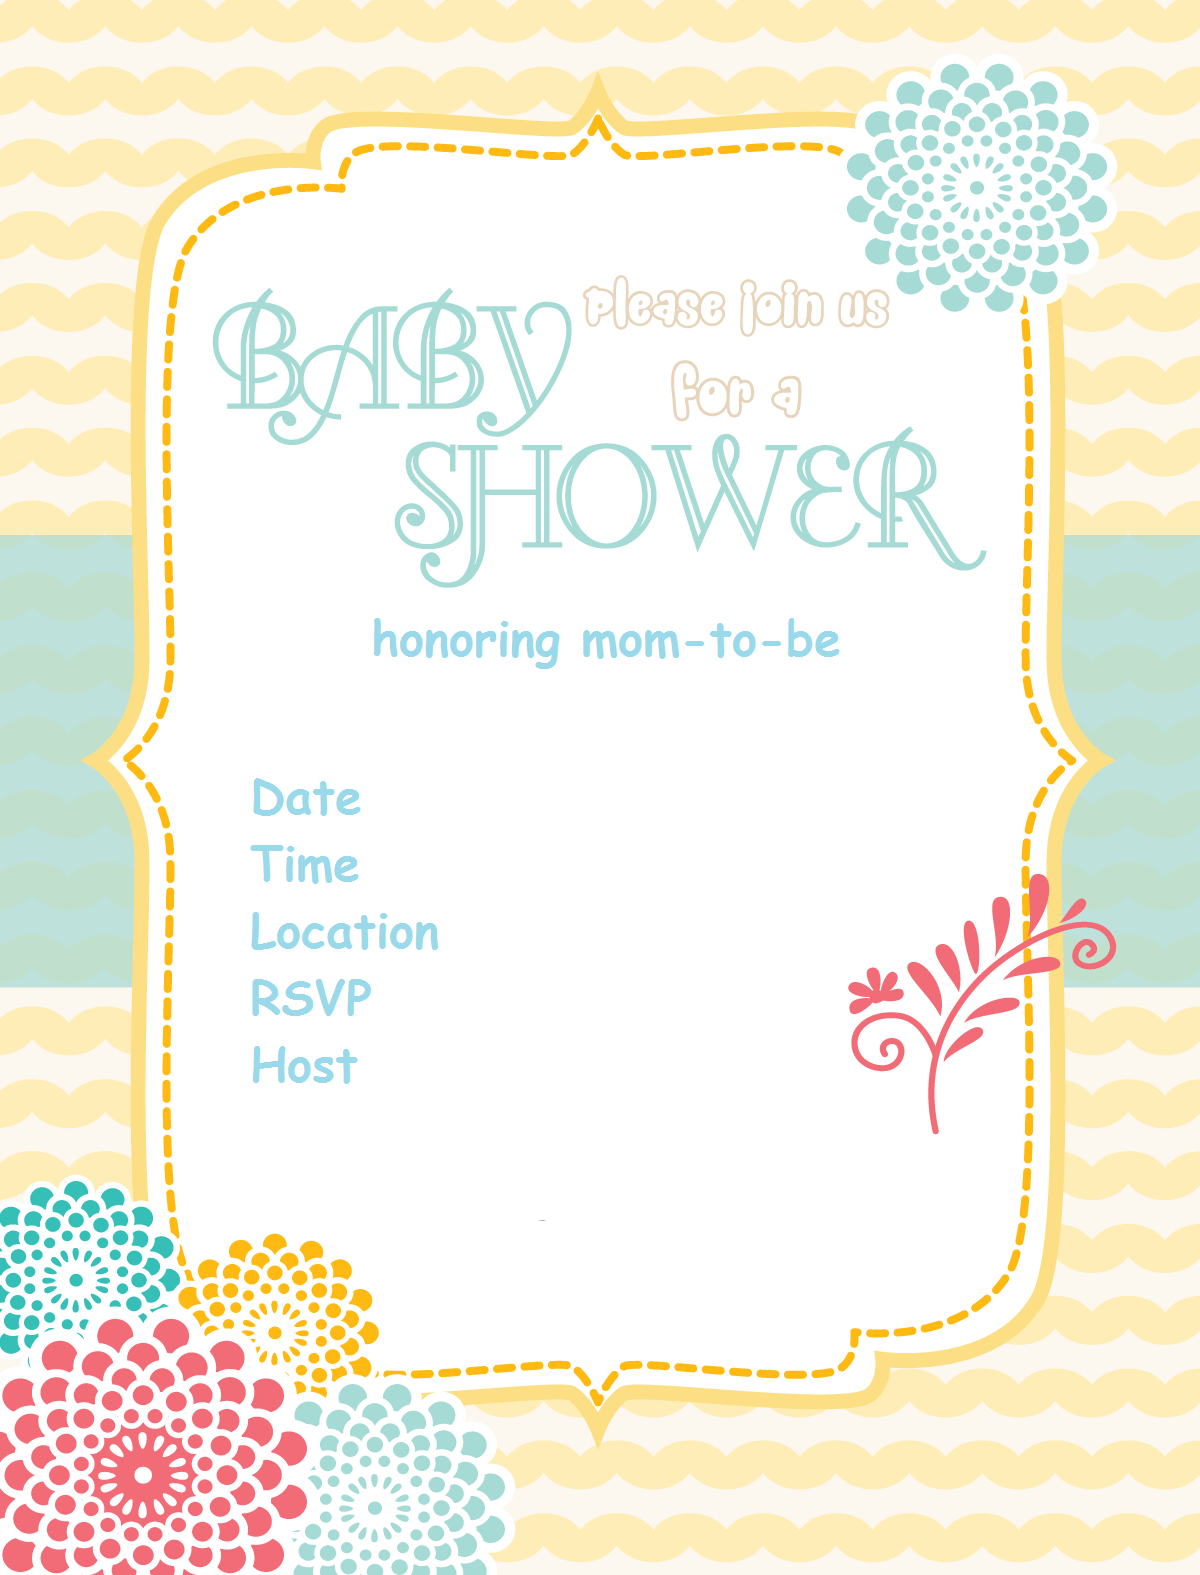 Free Printable Baby Shower Invitations - Baby Shower Ideas - Themes - Free Printable Baby Shower Invitations